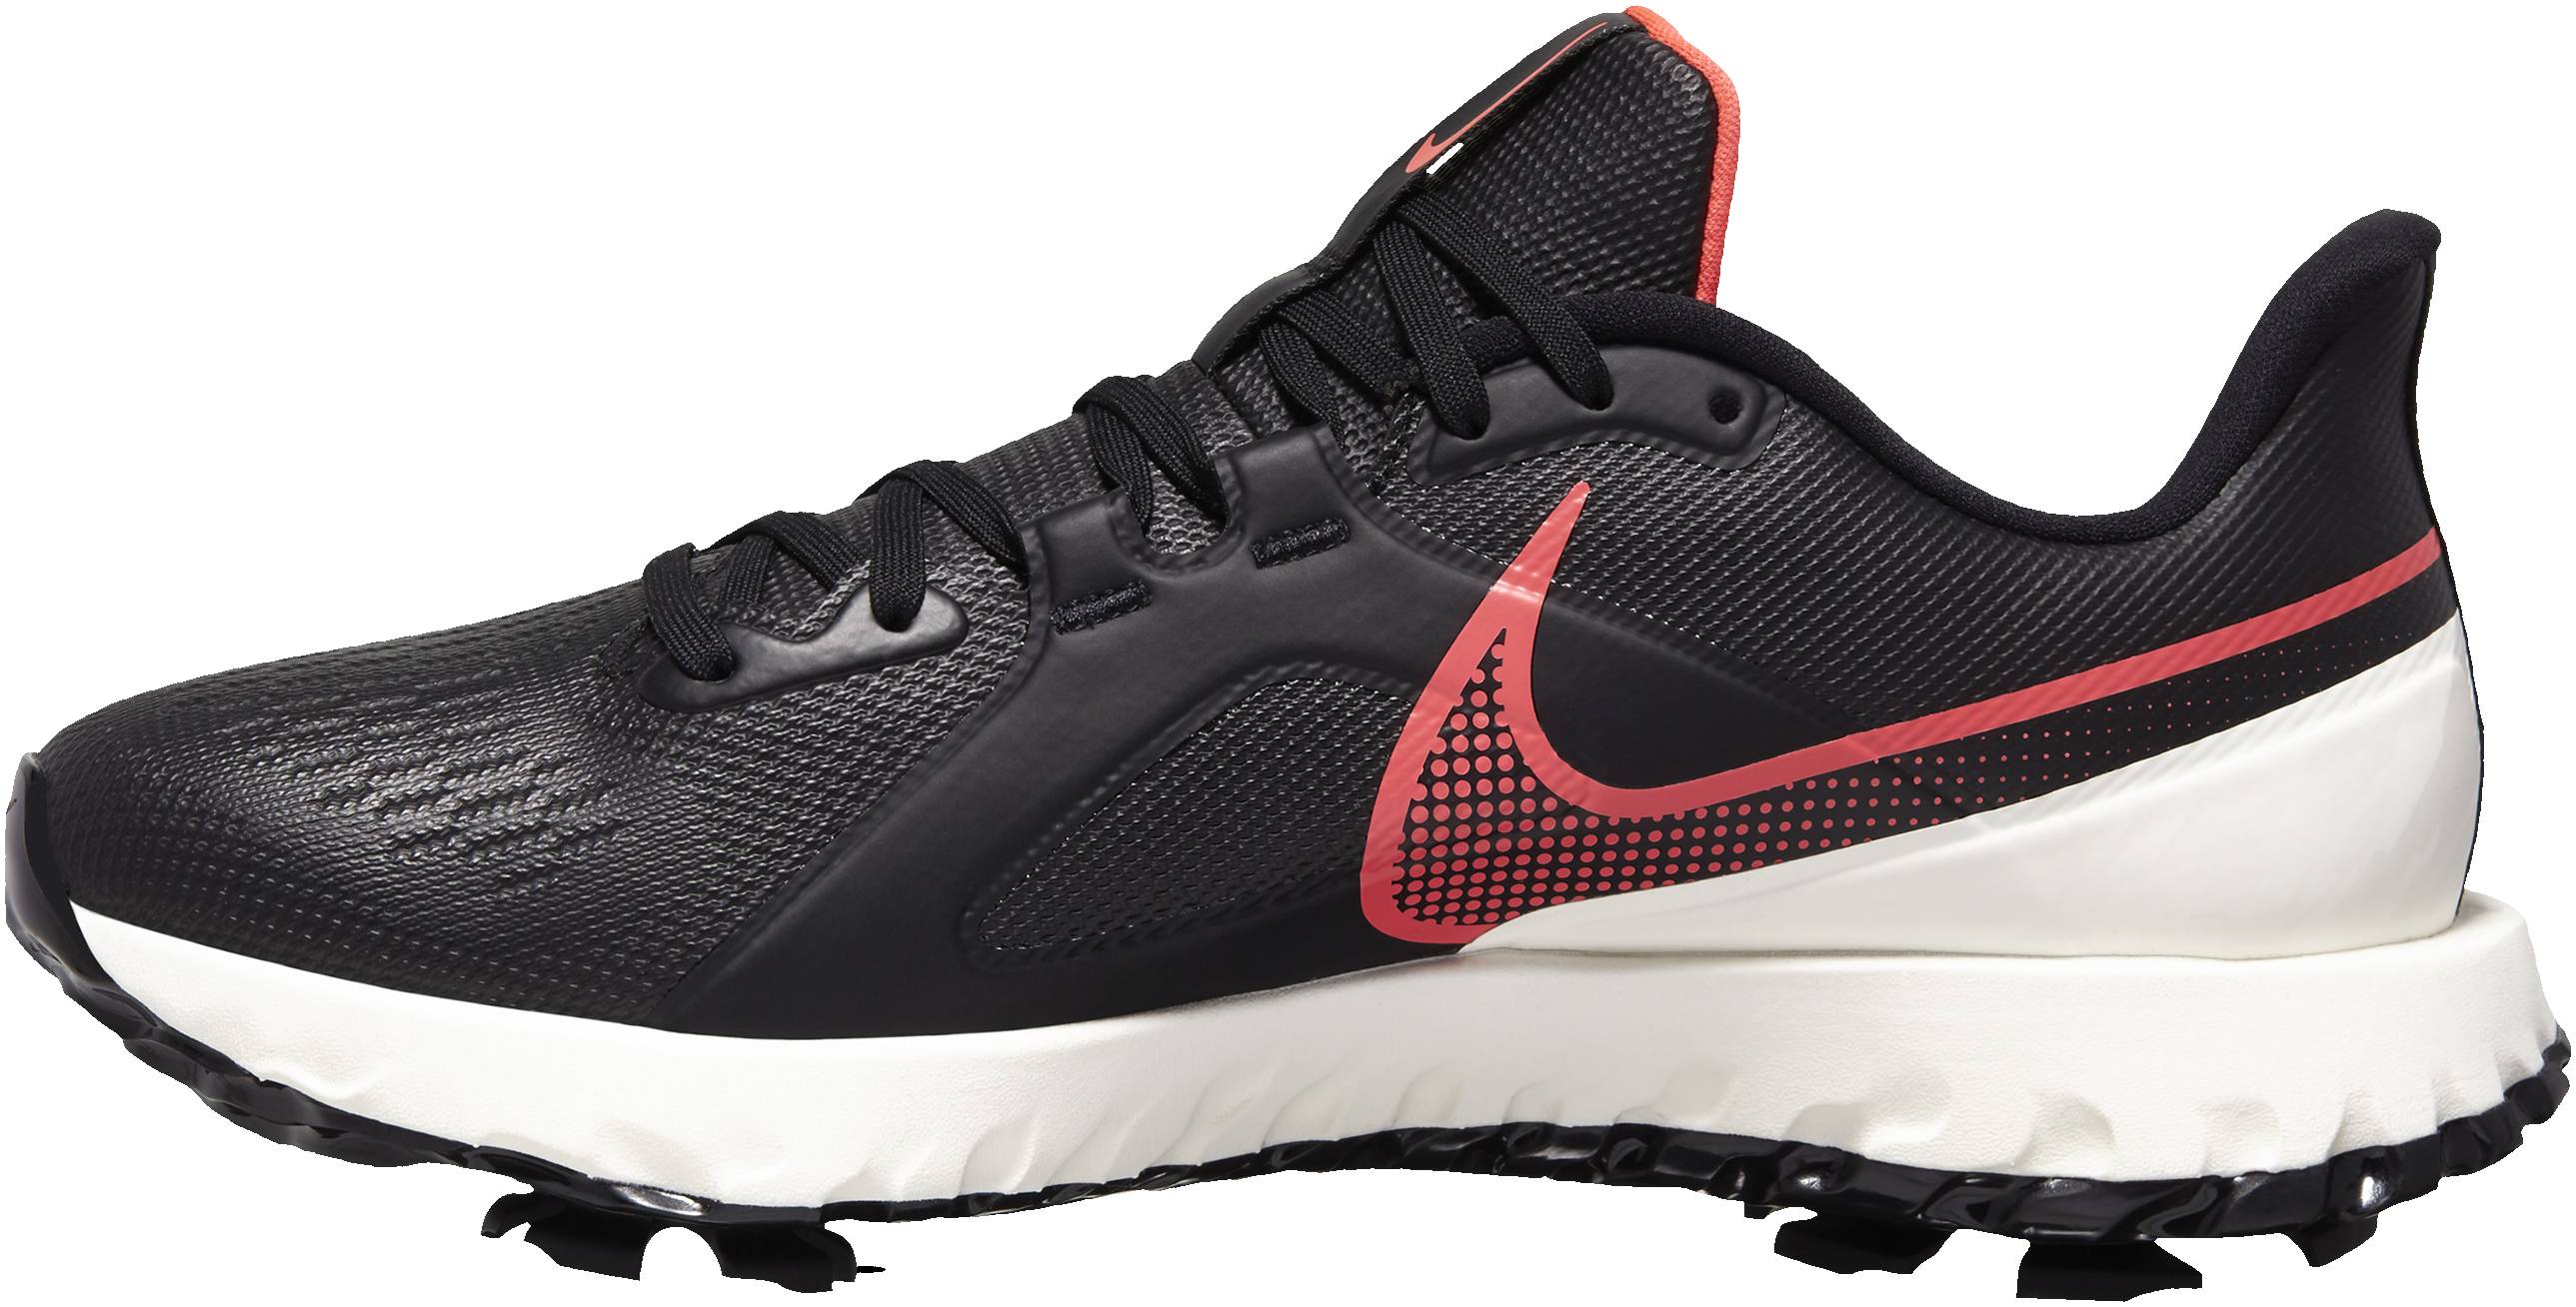 nike professional running shoes